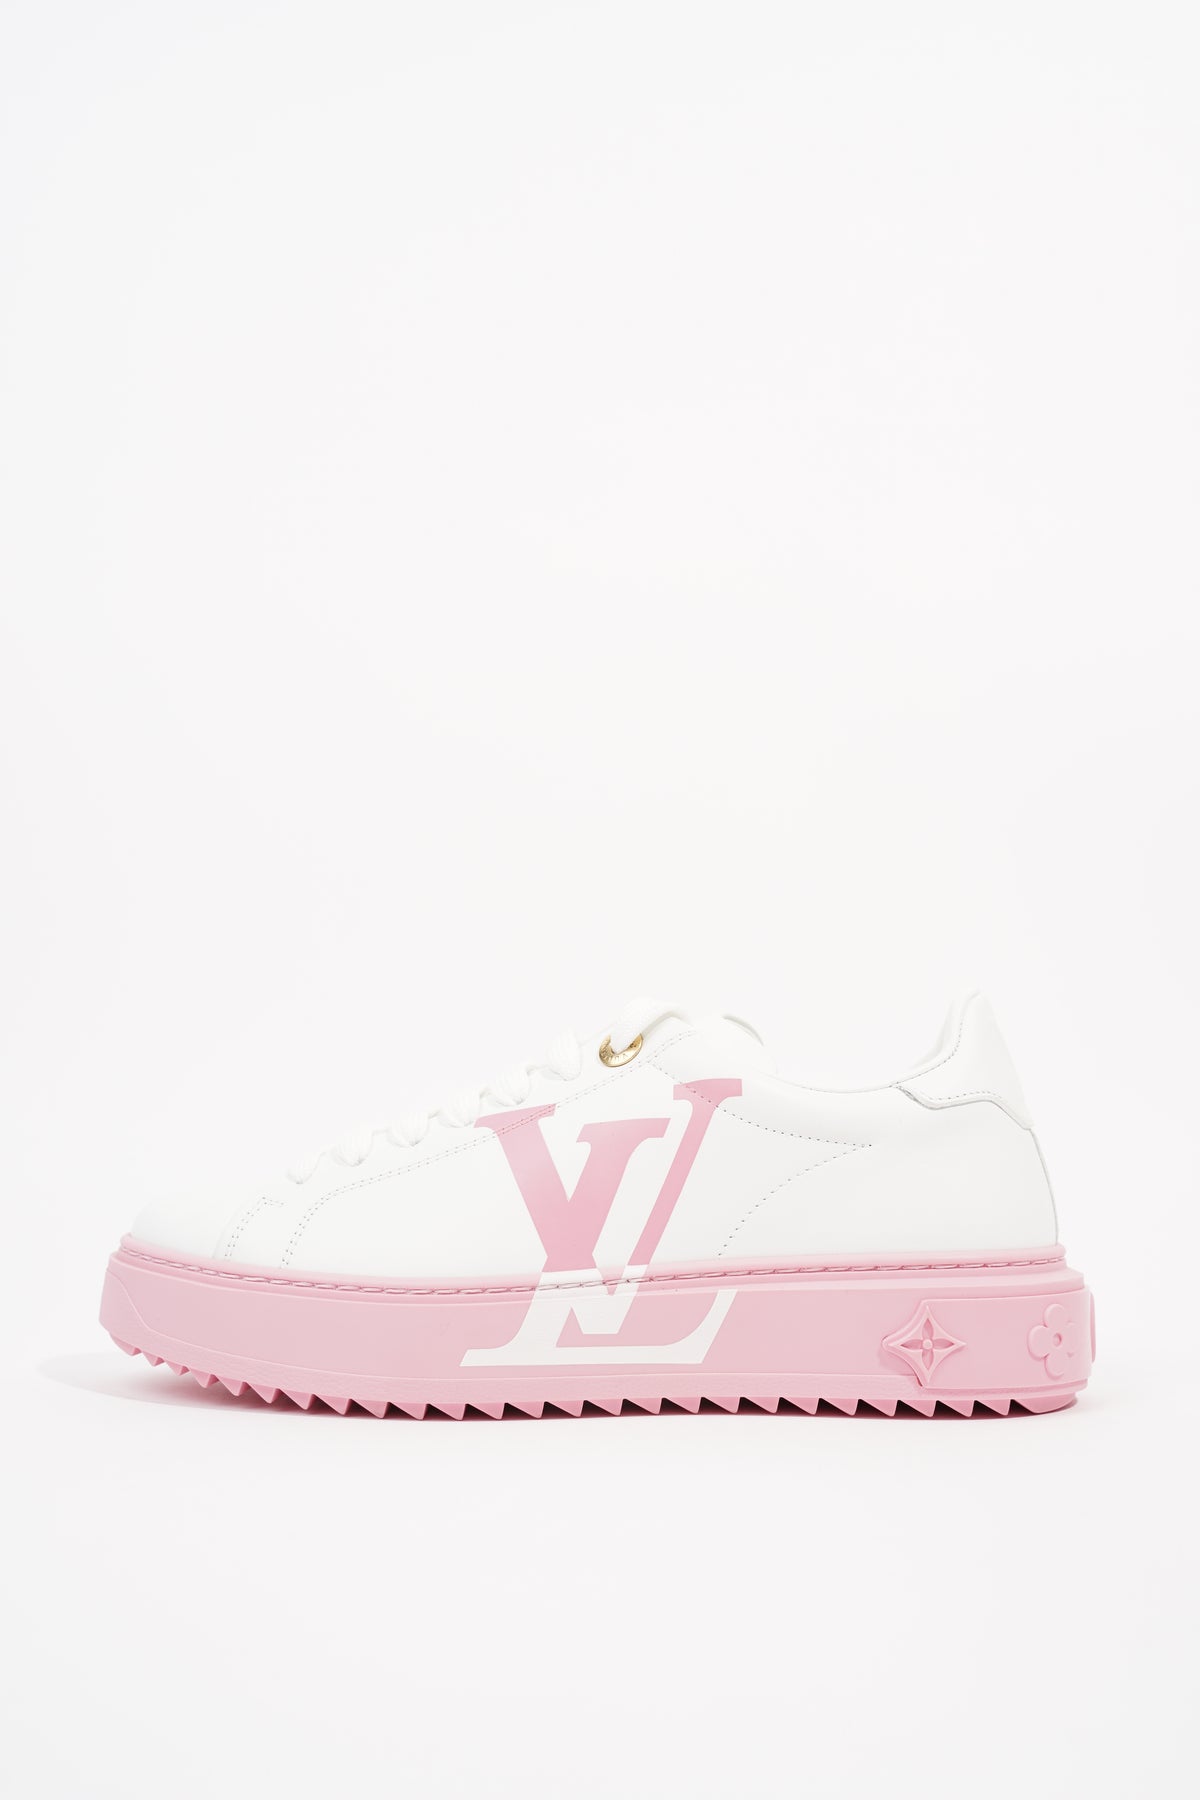 Louis Vuitton Time Out LV Sneaker Light Pink HD On Feet 